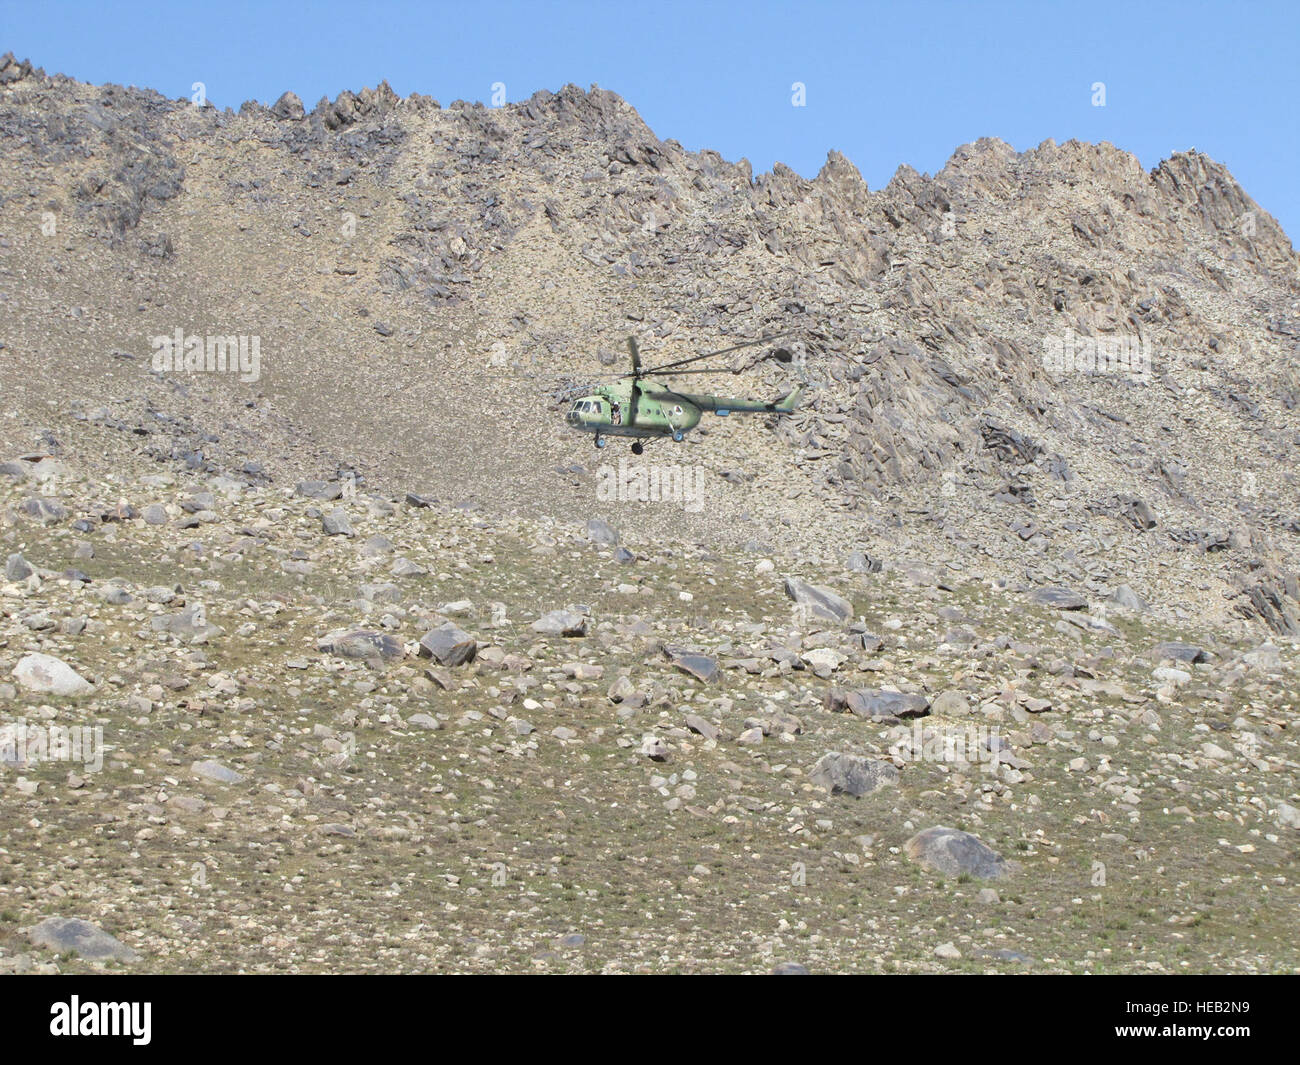 SALANG PASS, Afghanistan –Afghan National Army Air Corps Mi-17 prepares to land in a landing zone at an elevation of 12,000 feet, May 22, 2010. This is the closest aircraft could land safely to get the needed supplies to conduct recovery efforts of the Pamir Airlines passenger jet that crashed on Monday.  There were no survivors among the 38 passengers and 5 crew.  Tech. Sgt. Mike Tateishi/) Stock Photo